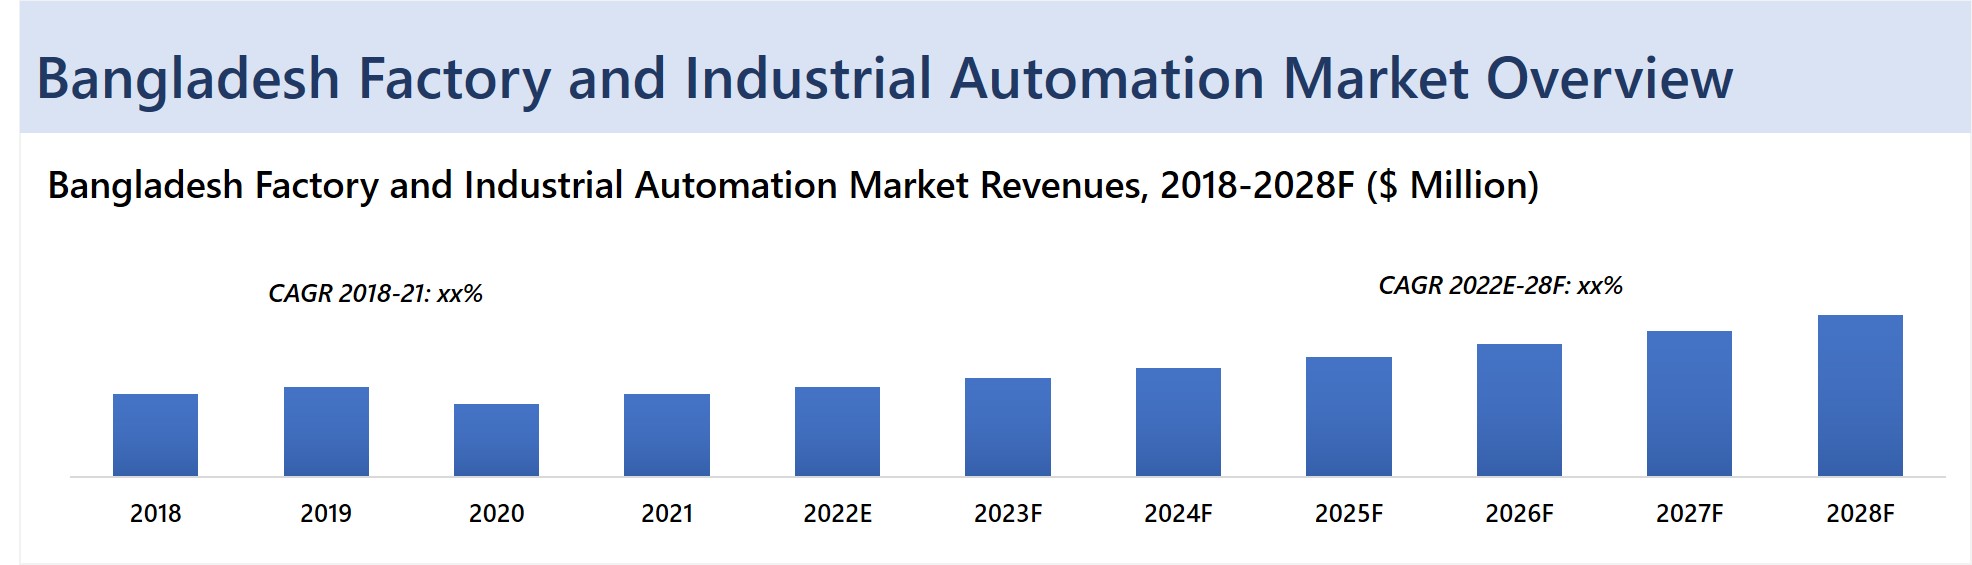 Bangladesh Factory and Industrial Automation Market